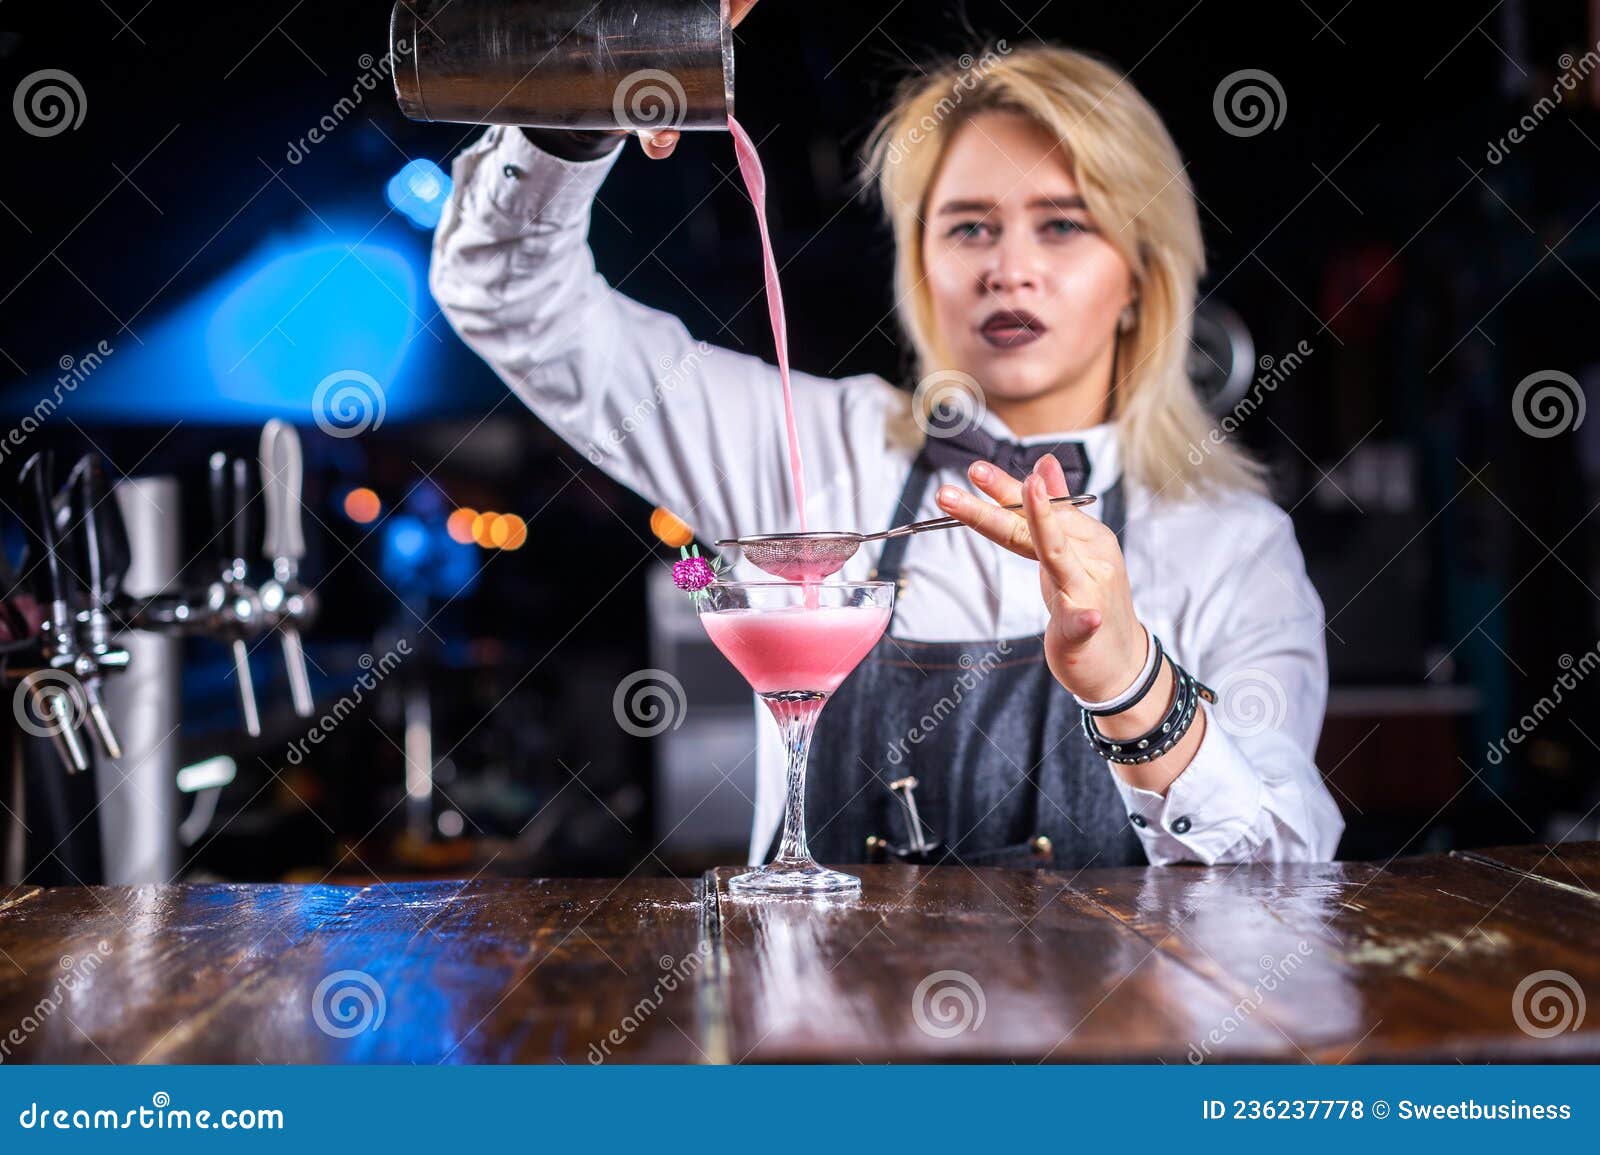 Portrait of Girl Barman Places the Finishing Touches on a Drink at Bar ...